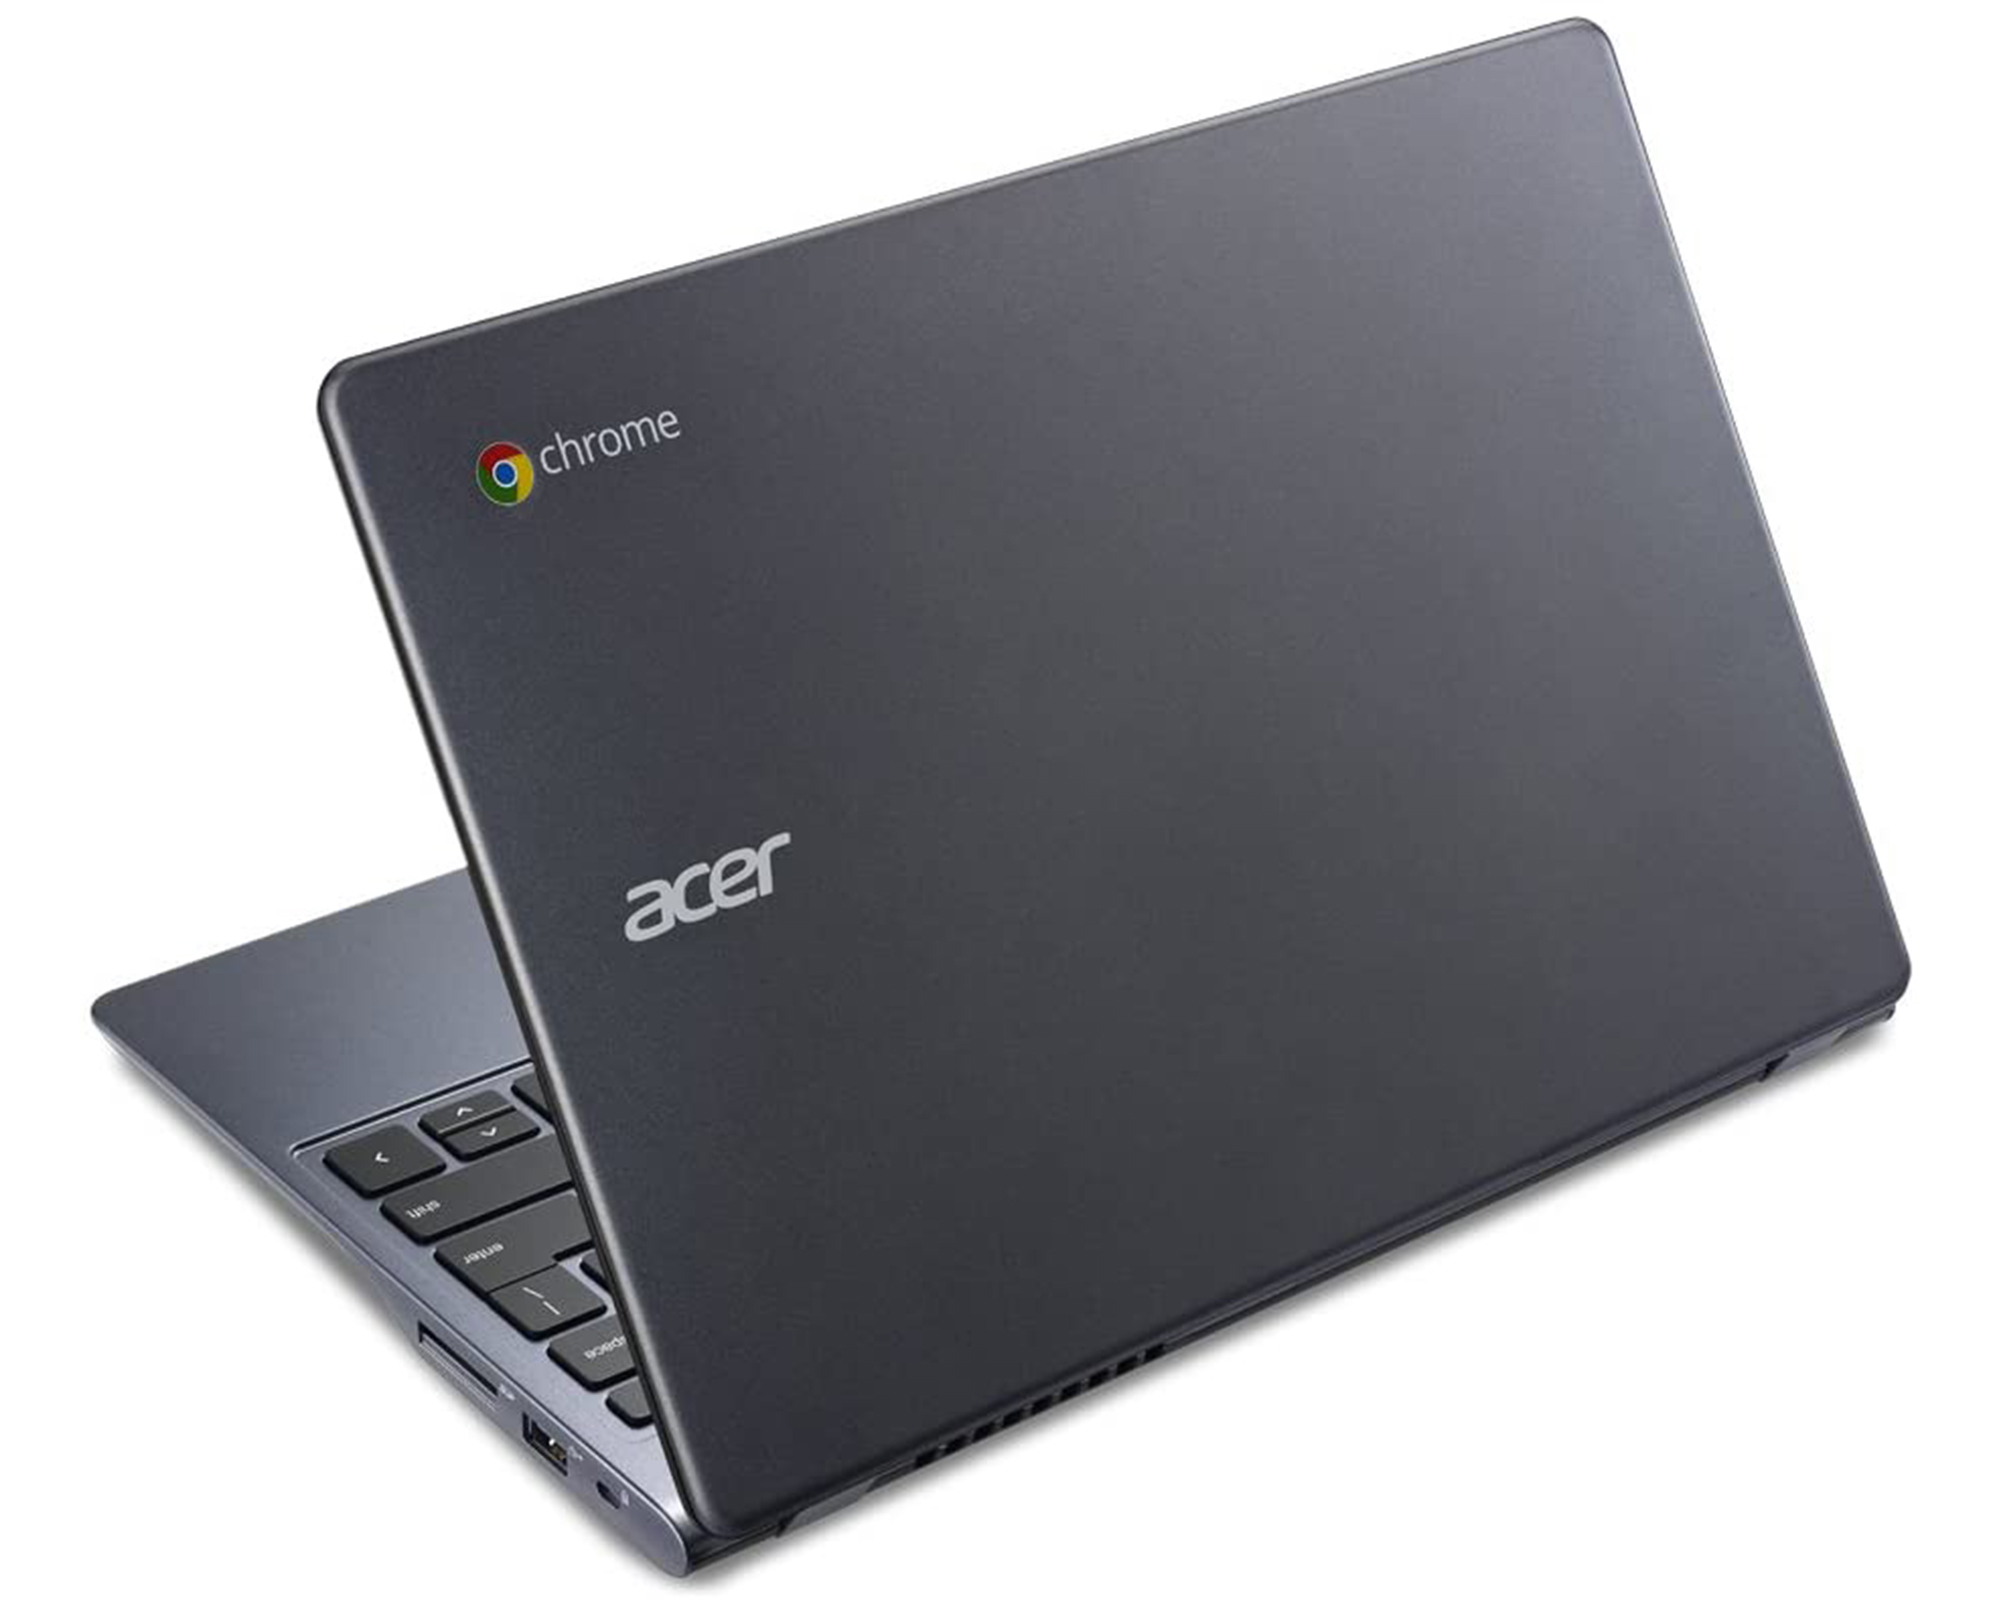 Restored Details about Acer C720-2103 11.6 in chromebook, Intel Celeron 1.4GHz 2GB Ram - image 6 of 8